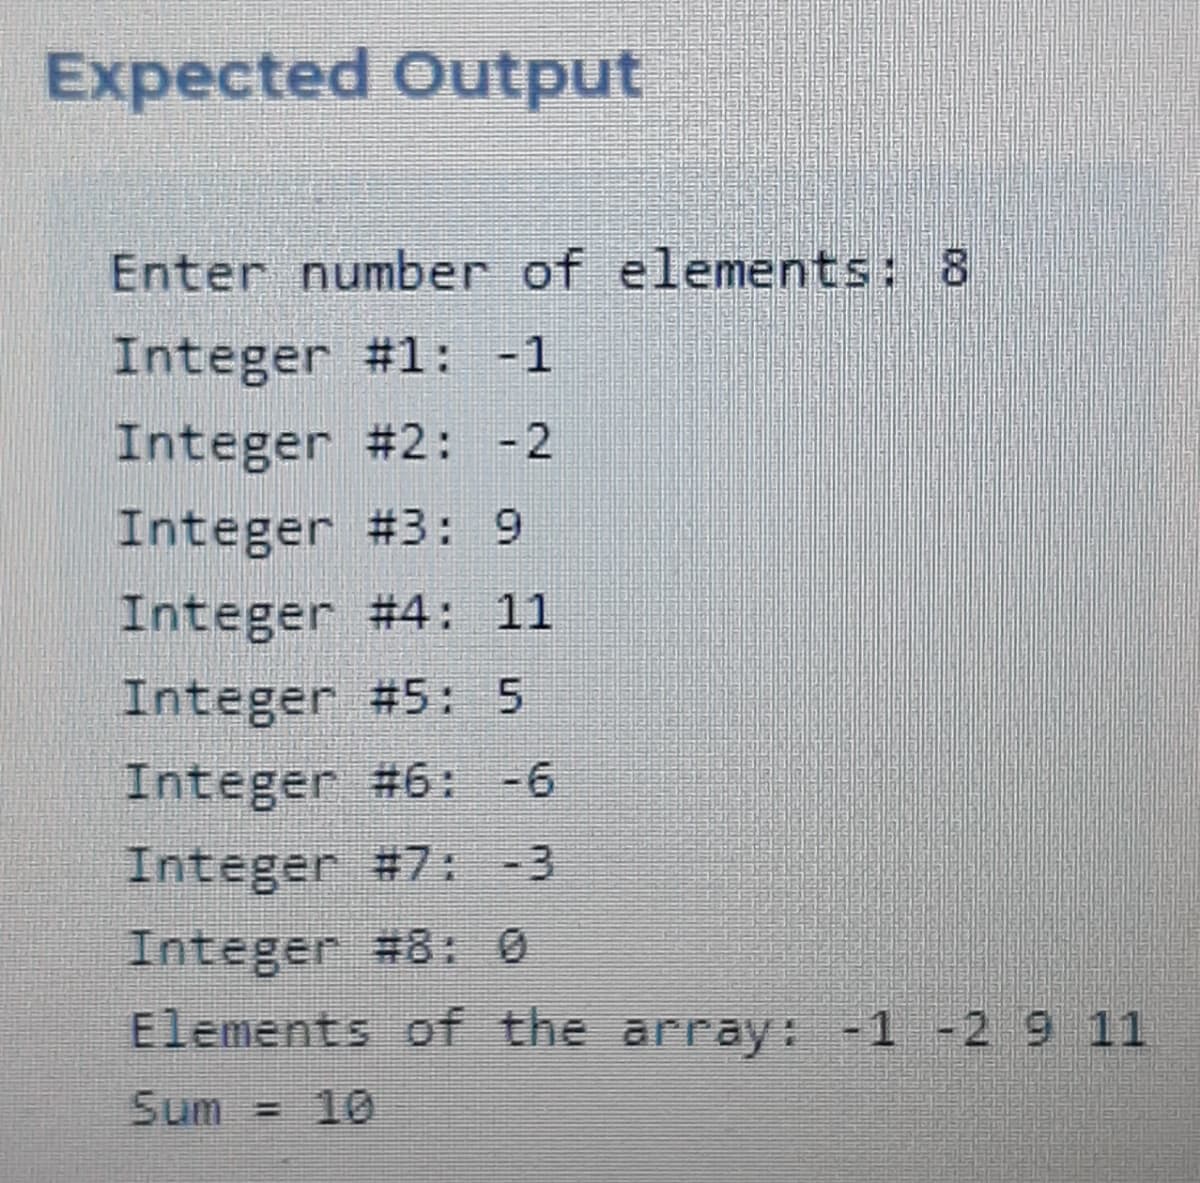 Expected Output
Enter number of elements: 8
Integer #1: -1
Integer #2: -2
Integer #3: 9
Integer #4: 11
Integer #5: 5
Integer #6: -6
Integer #7: -3
Integer #8: 0
Elements of the array: -1 -2 9 11
Sum = 10
